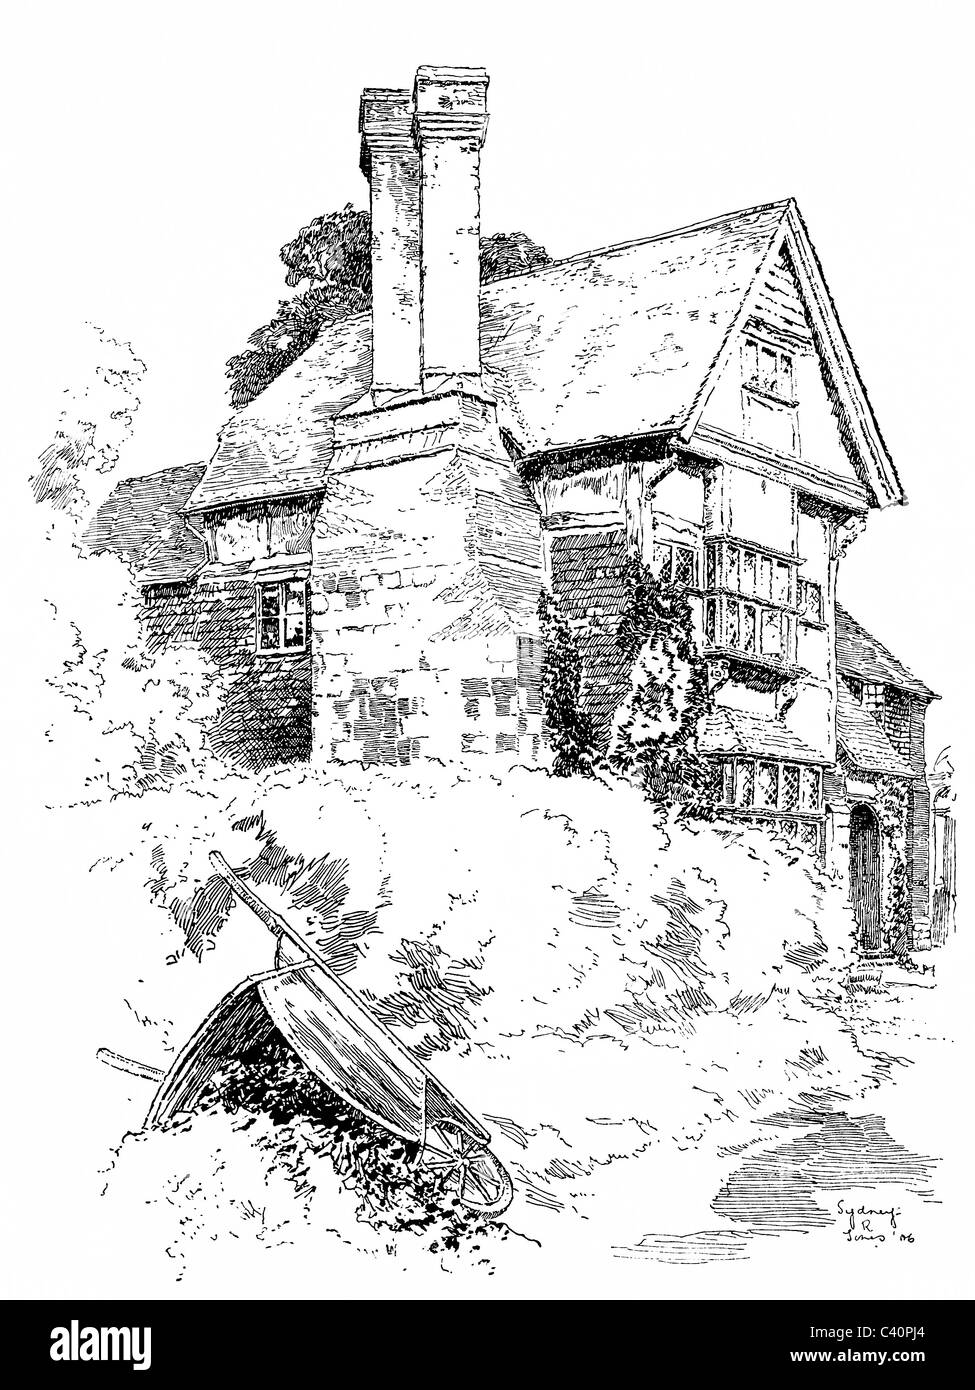 Penshurst, Kent - pen and ink illustration from 'Old English Country Cottages' by Charles Holme, 1906. Stock Photo